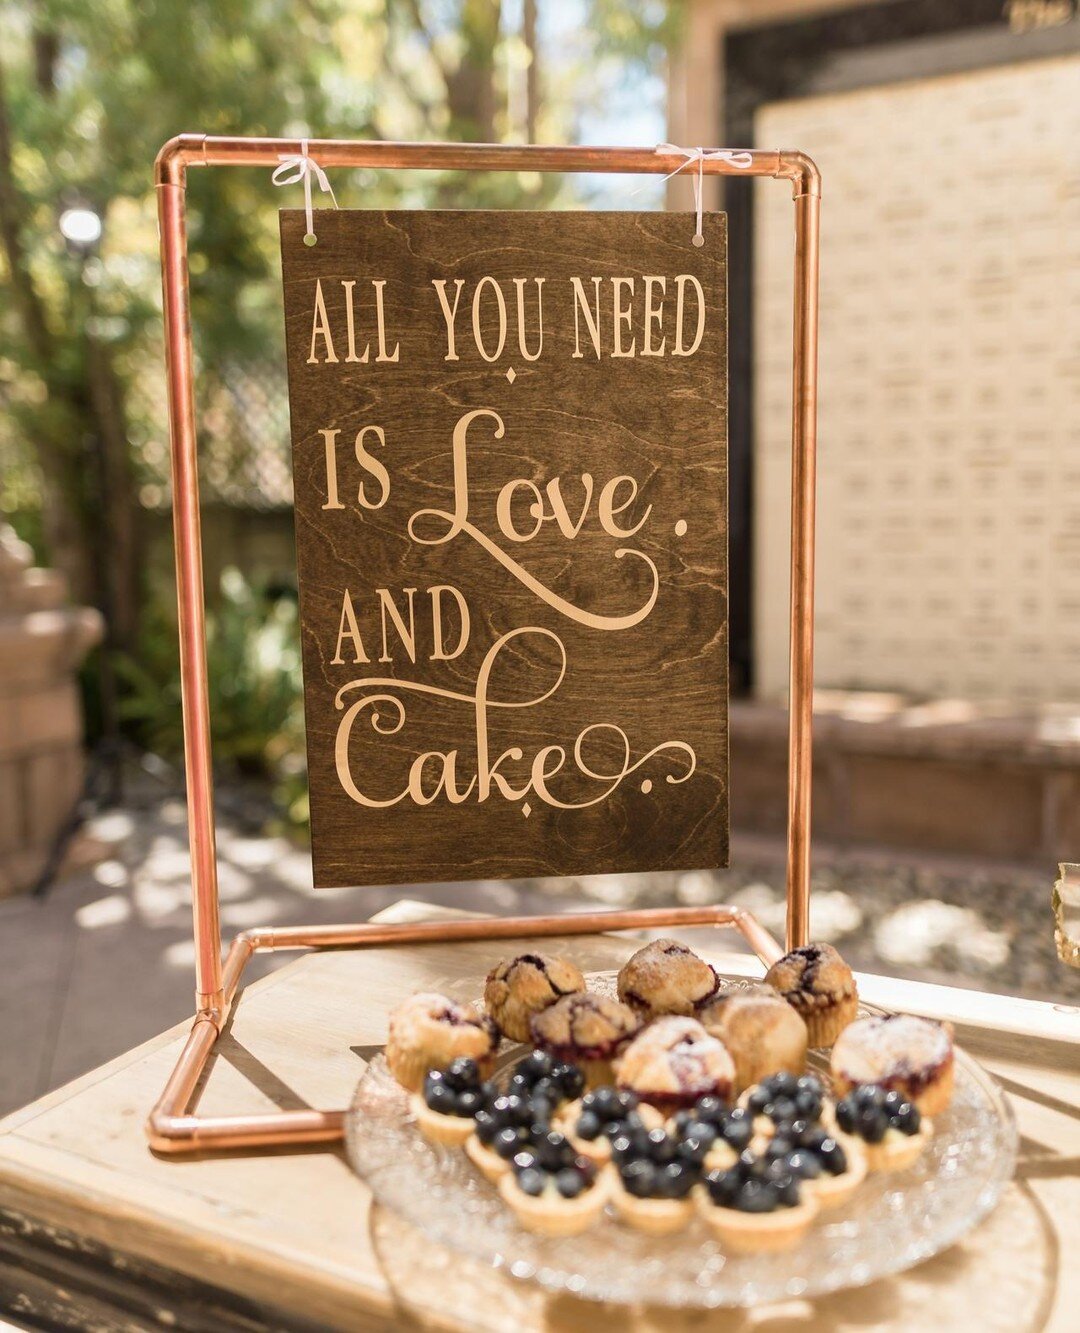 ... or maybe faith and trust and pixie dust? 😉⁠
⁠
⁠
⁠Hope everyone had a magical start to your week!⁠
⁠
⁠
⁠
⁠
photo: @lightandluxestudios⁠
desserts: @jayscatering⁠
signage: @thetipsycricket⁠
⁠
⁠
#weddingshoot #styledshoot #weddingvibes #bridalinspo 